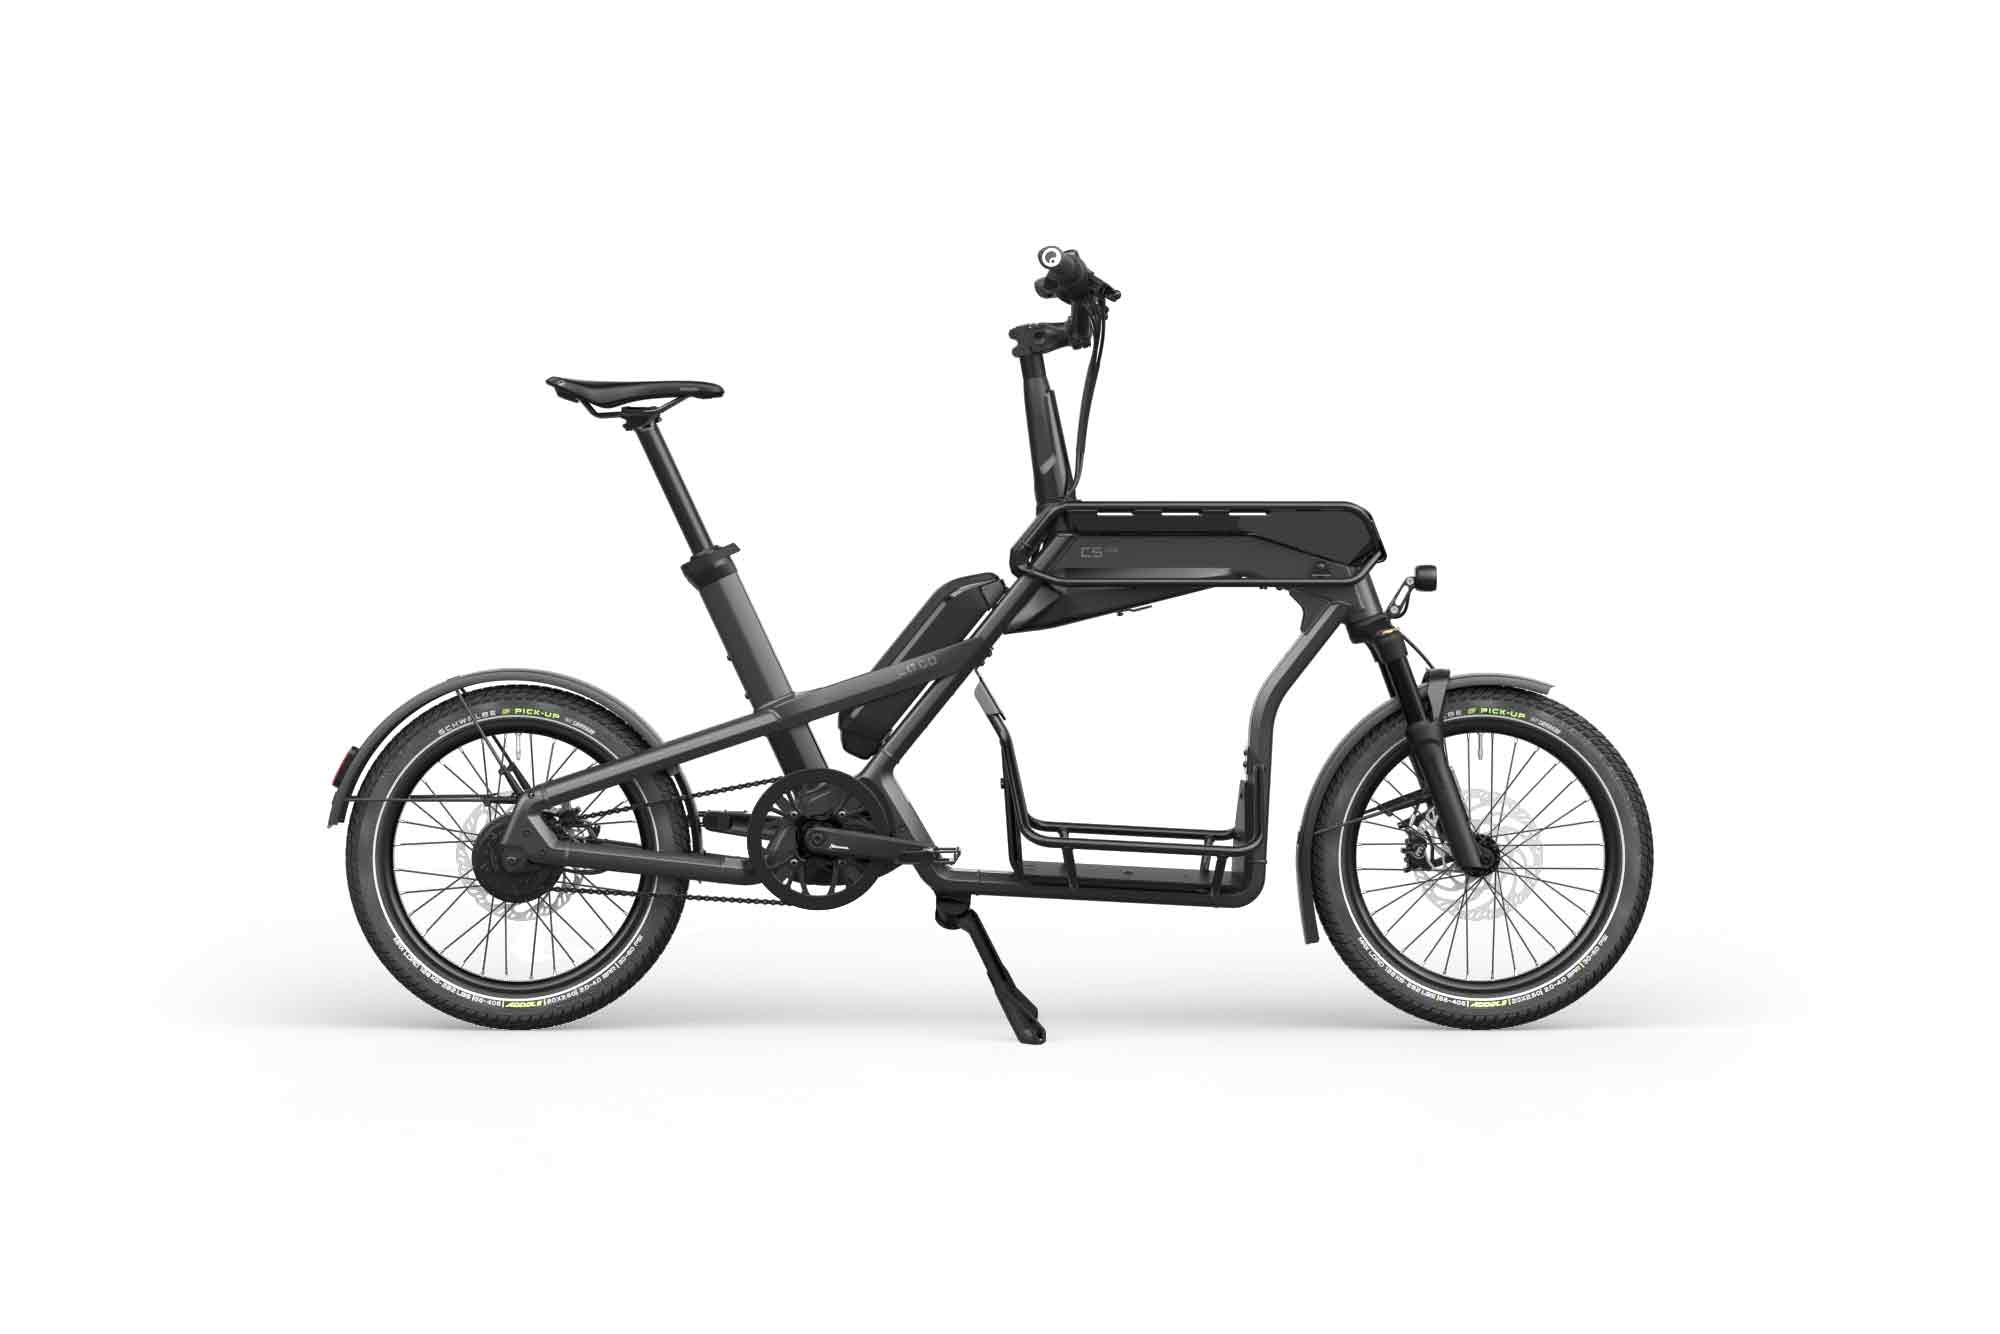 Cago cs 150 is the name of the mid-range model in the new mini cargo bike series.